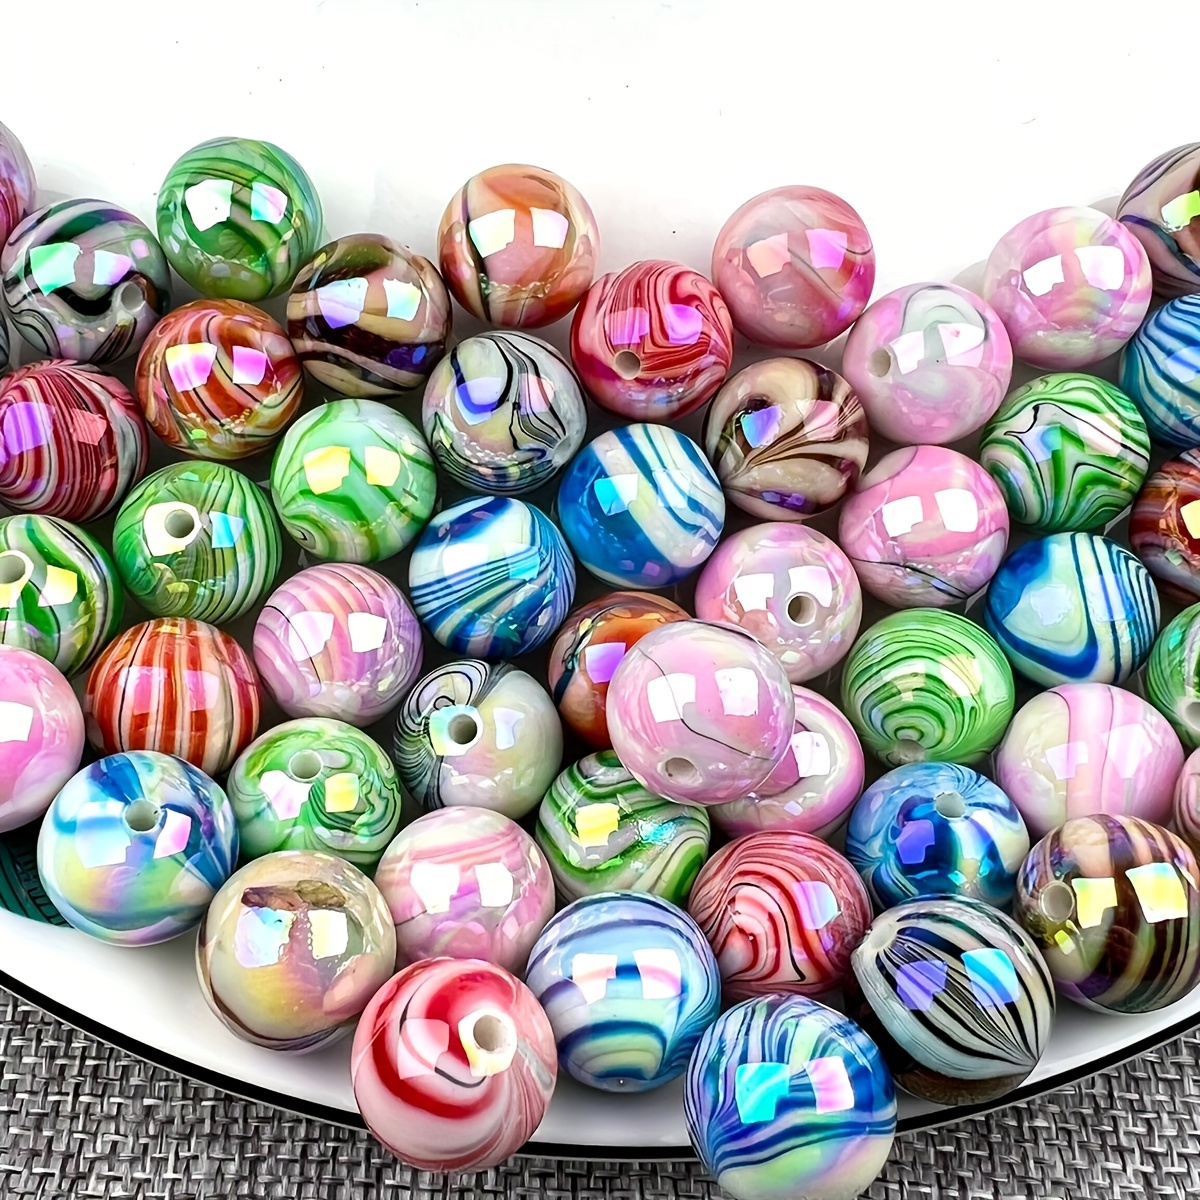 12mm Navajo White Silicone Beads, Silicone Beads in Bulk, 12mm silicone  bubblegum Beads, Chunky Beads